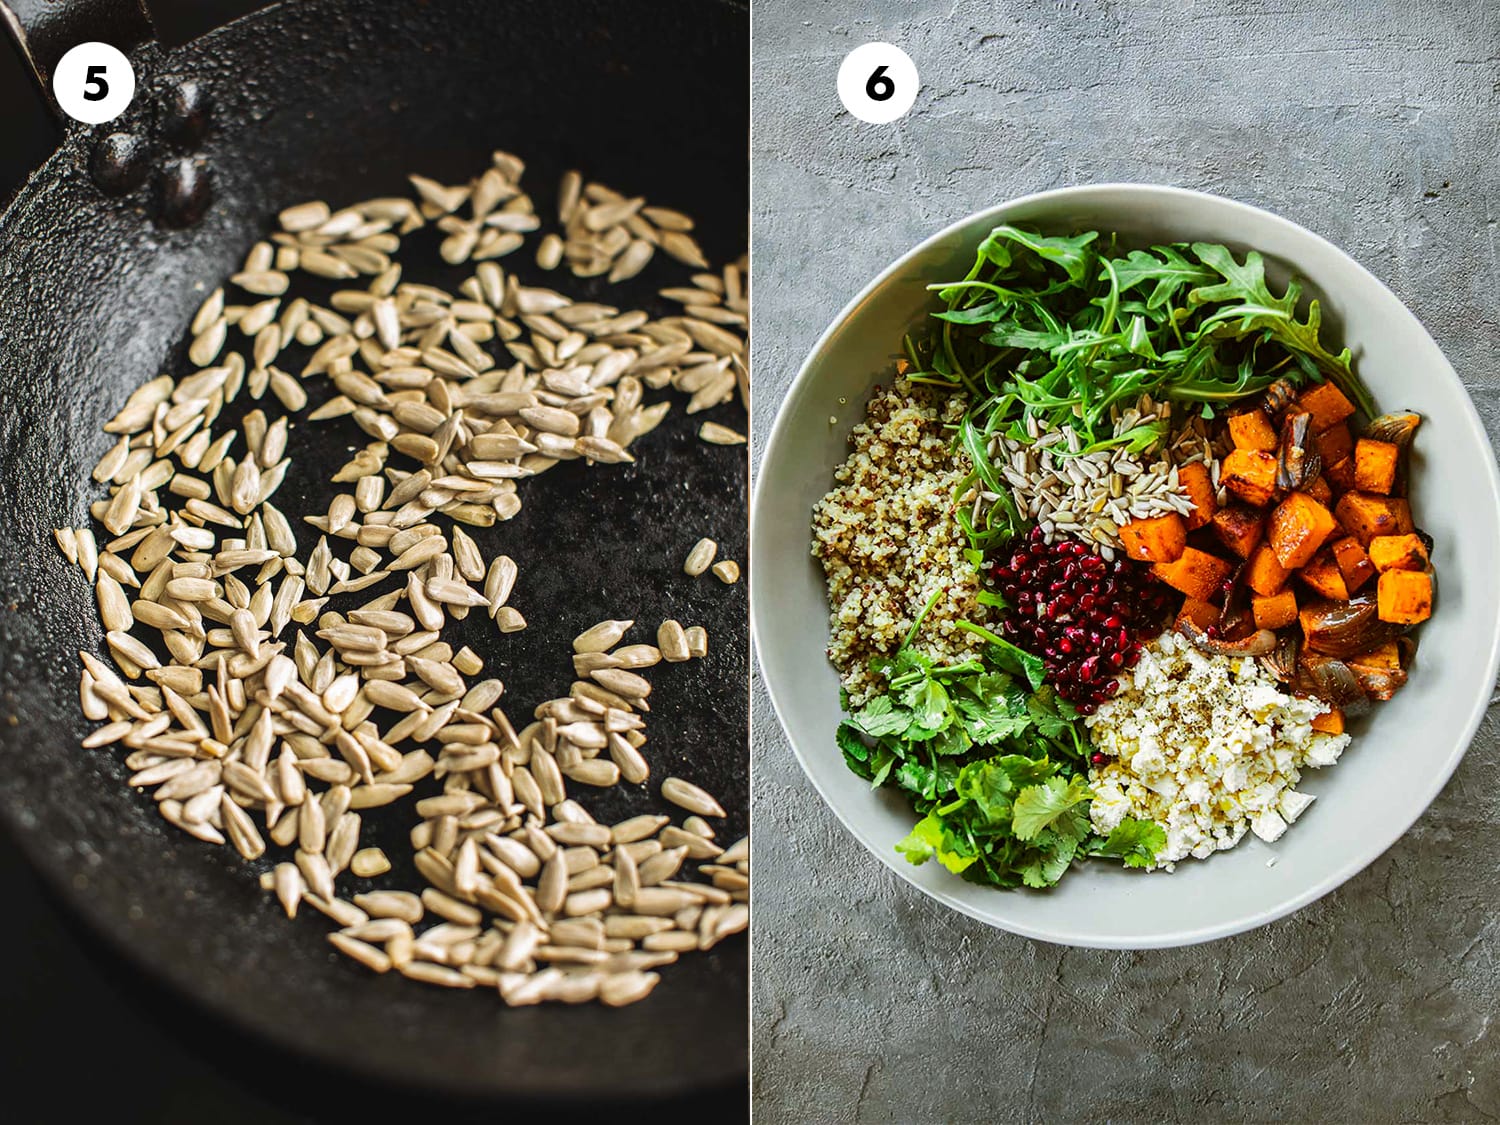 Toast sunflower seeds in a pan and assemble roast pumpkin salad by mixing all ingredients in a bowl.